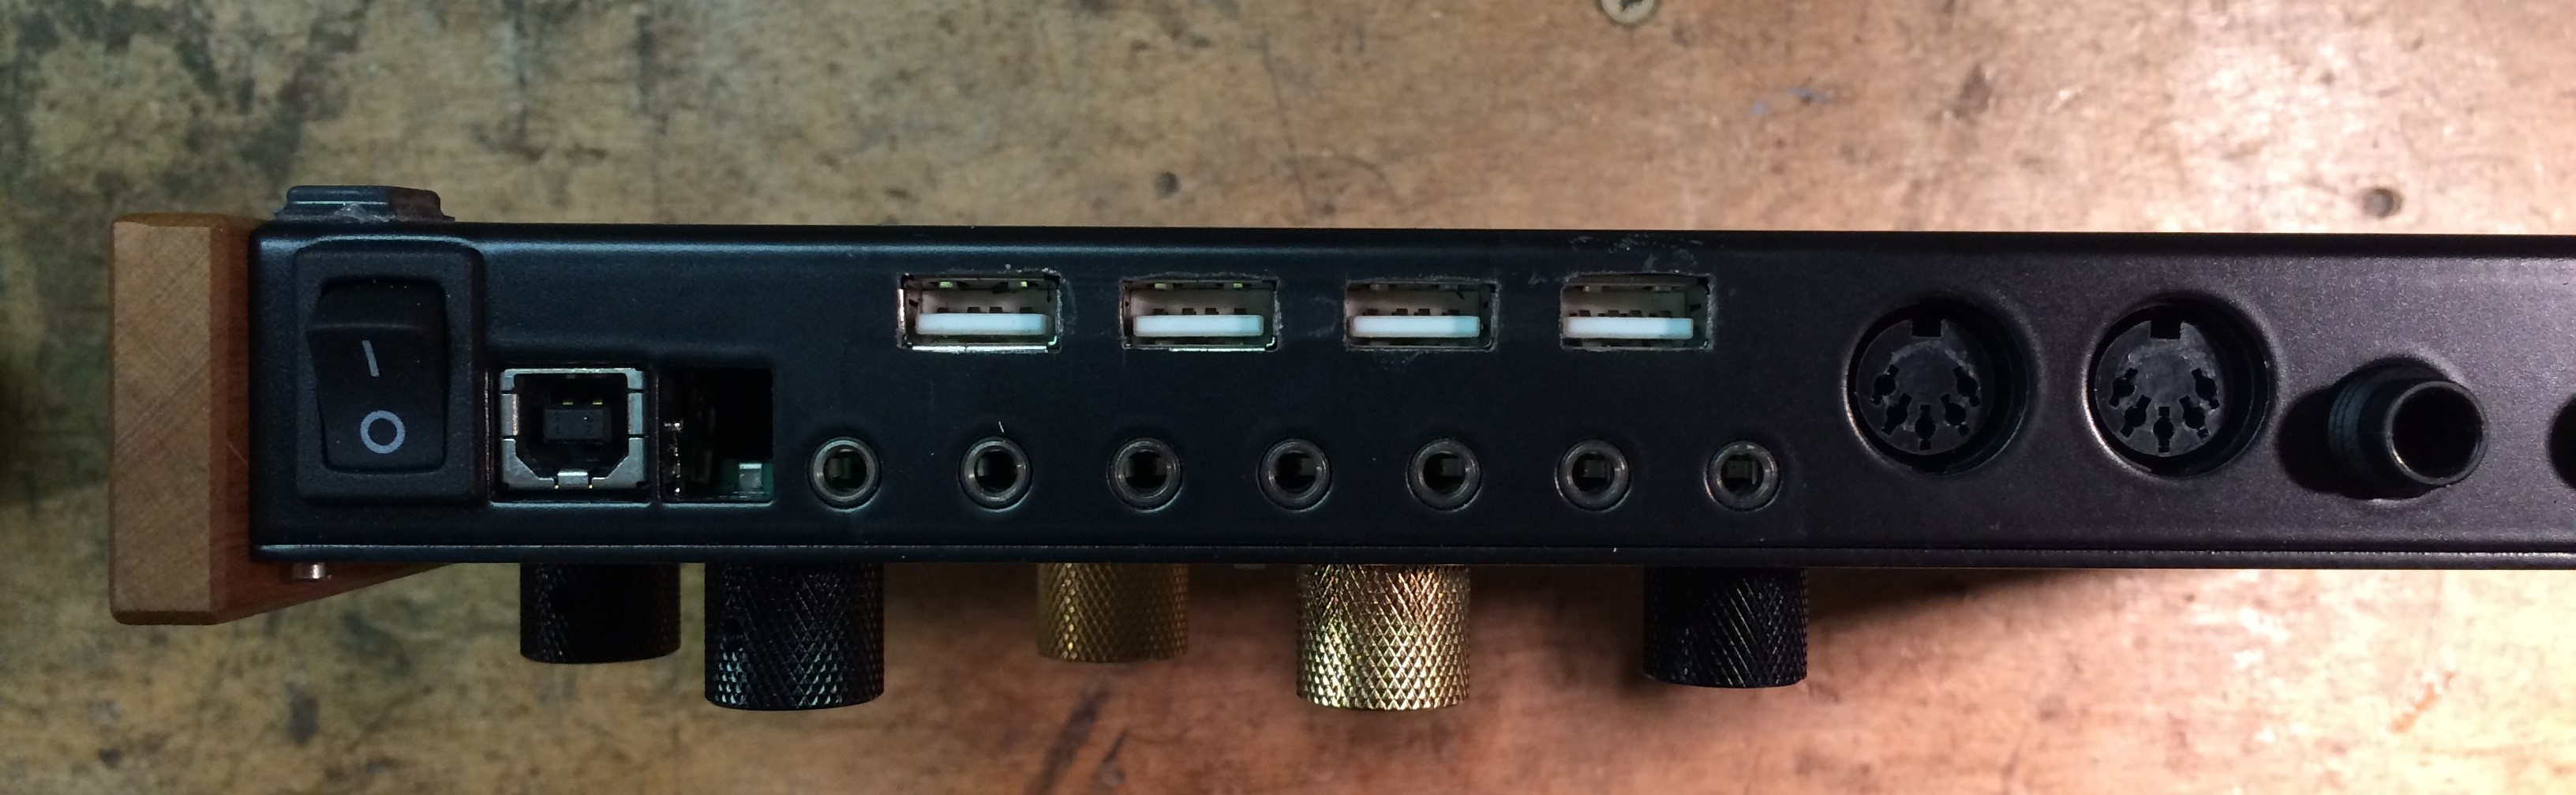 All holes lining up with USB ports